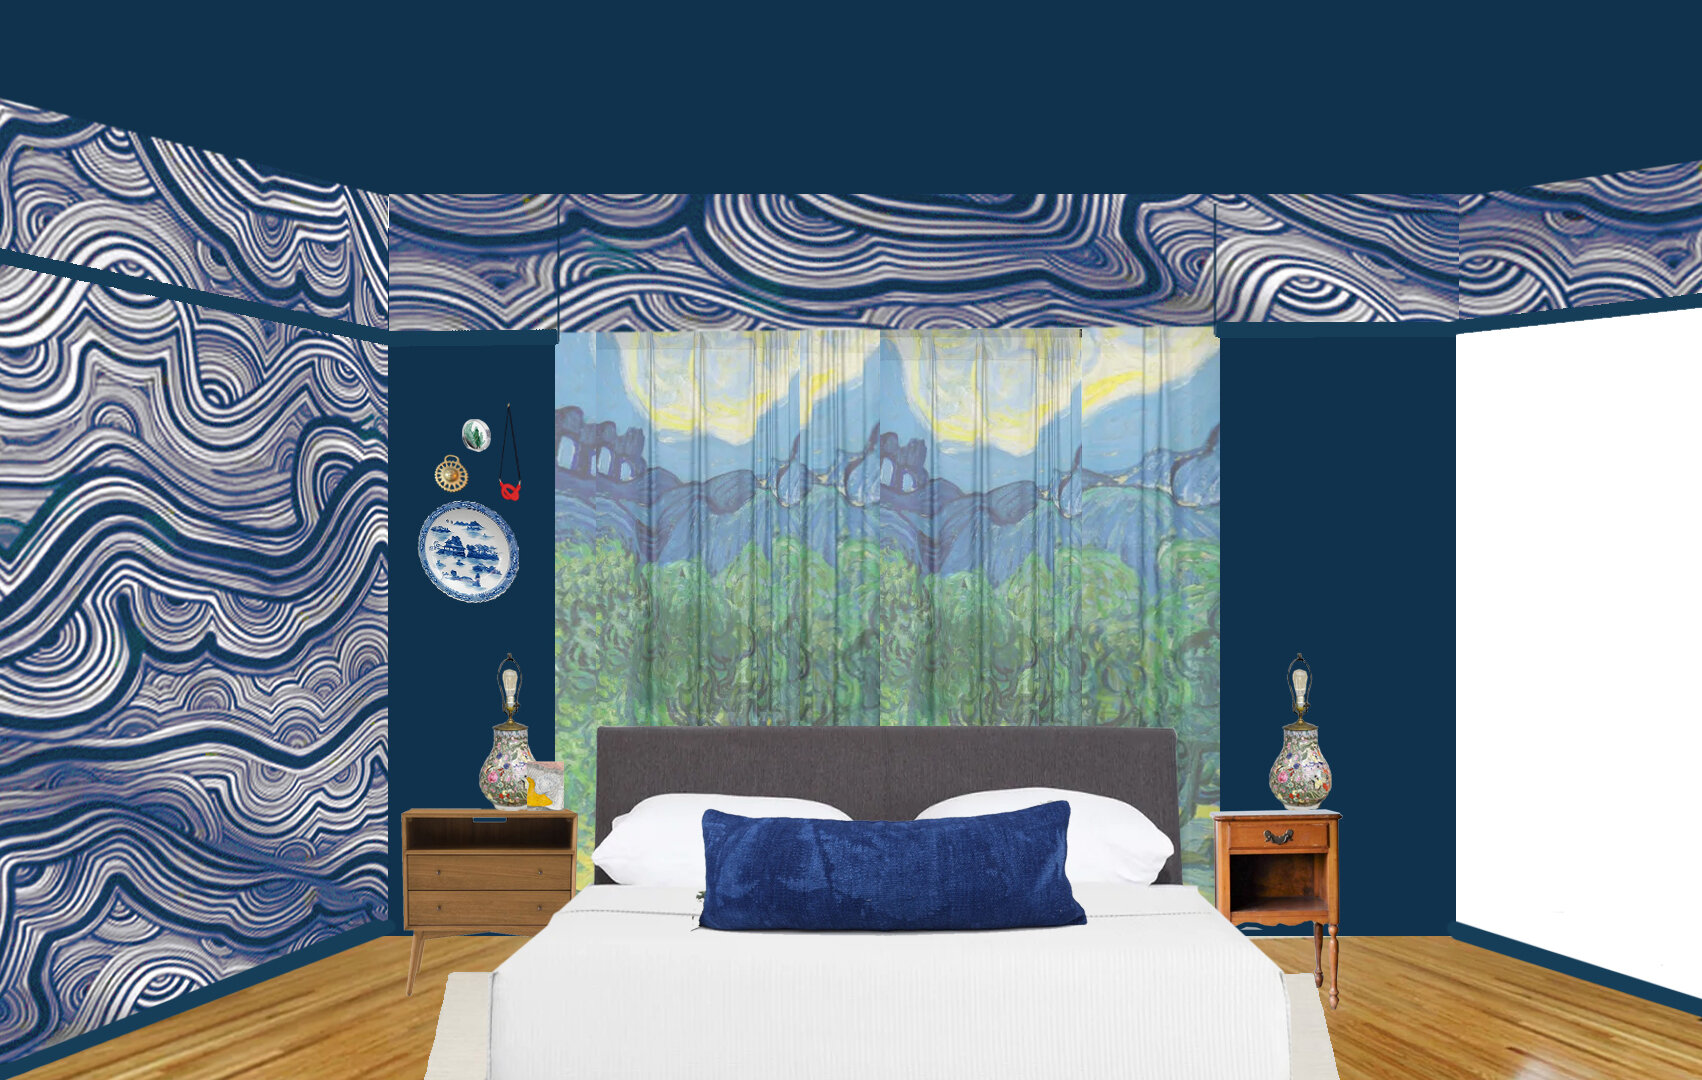 Mural inspired by a fabric design by Jenna Black